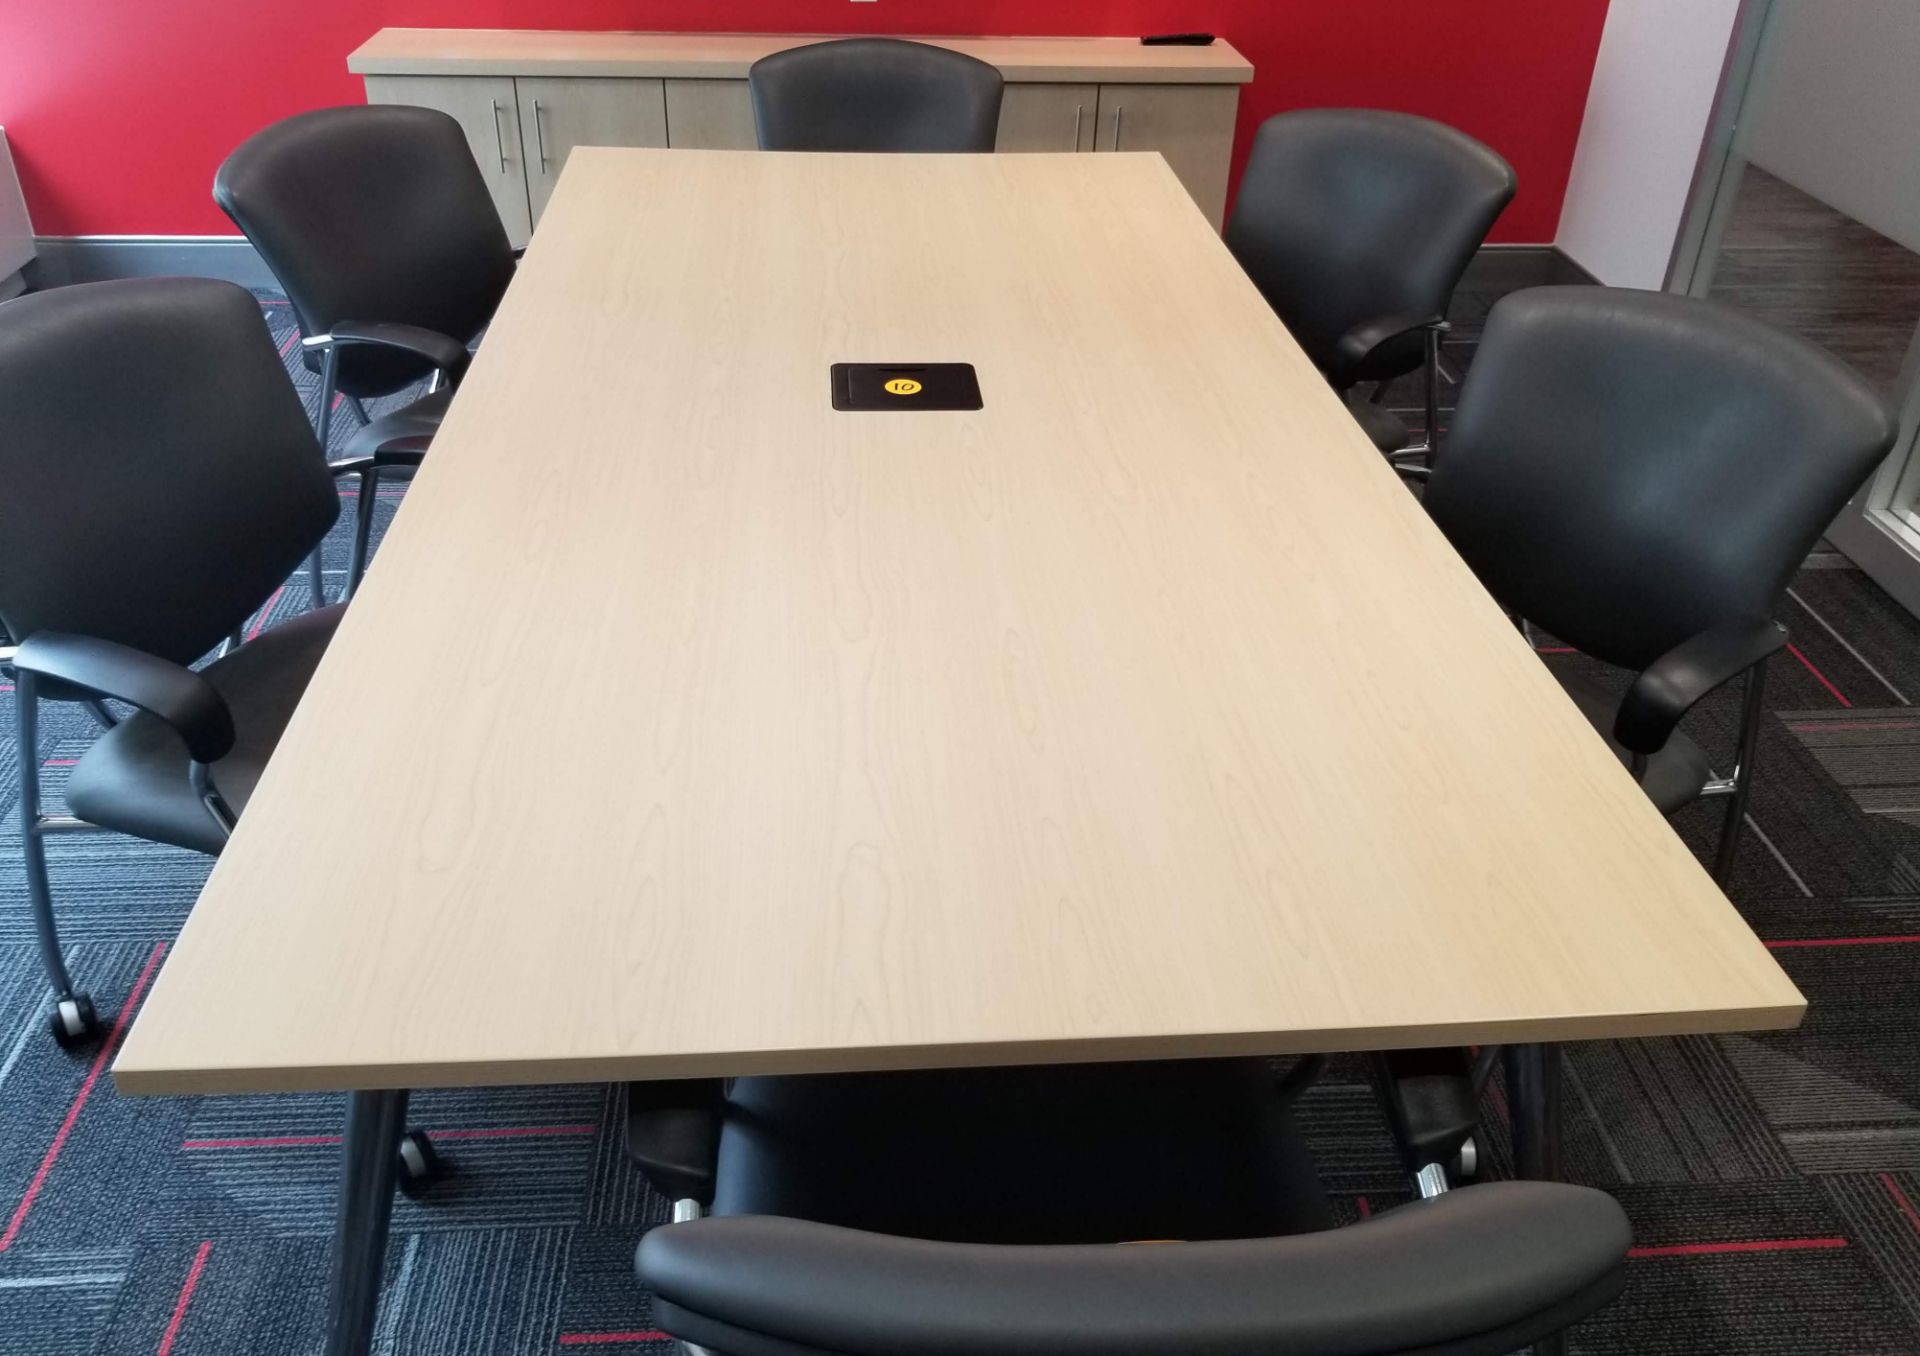 TEKNION - BOARD ROOM TABLE W/ POWER AND ADJUSTABLE LEG LEVELERS - 48"W x 96"L x 29.5" H - (*NO